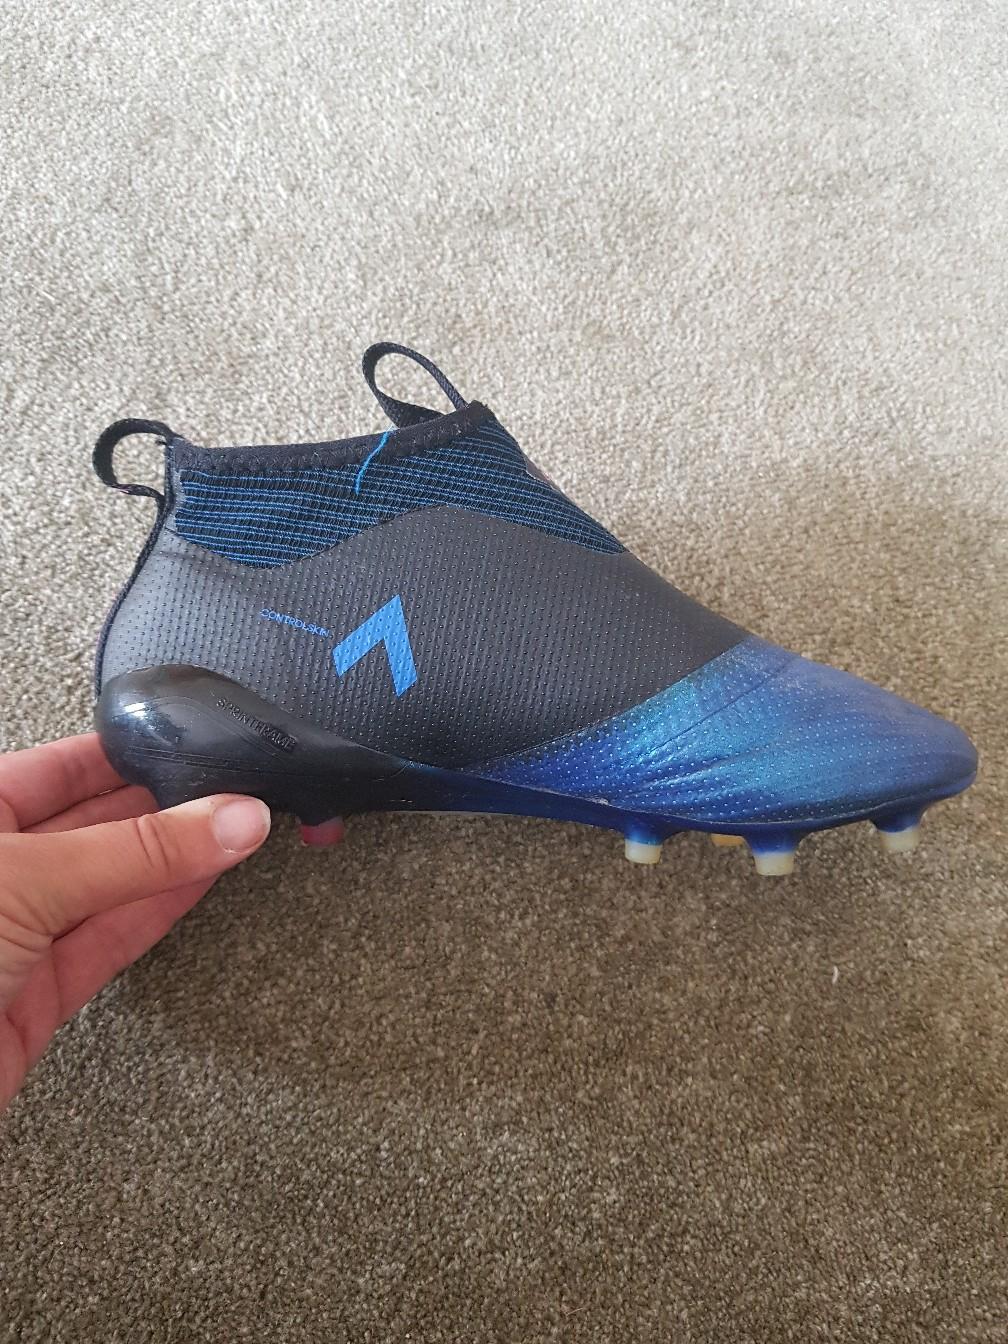 laceless football boots size 6